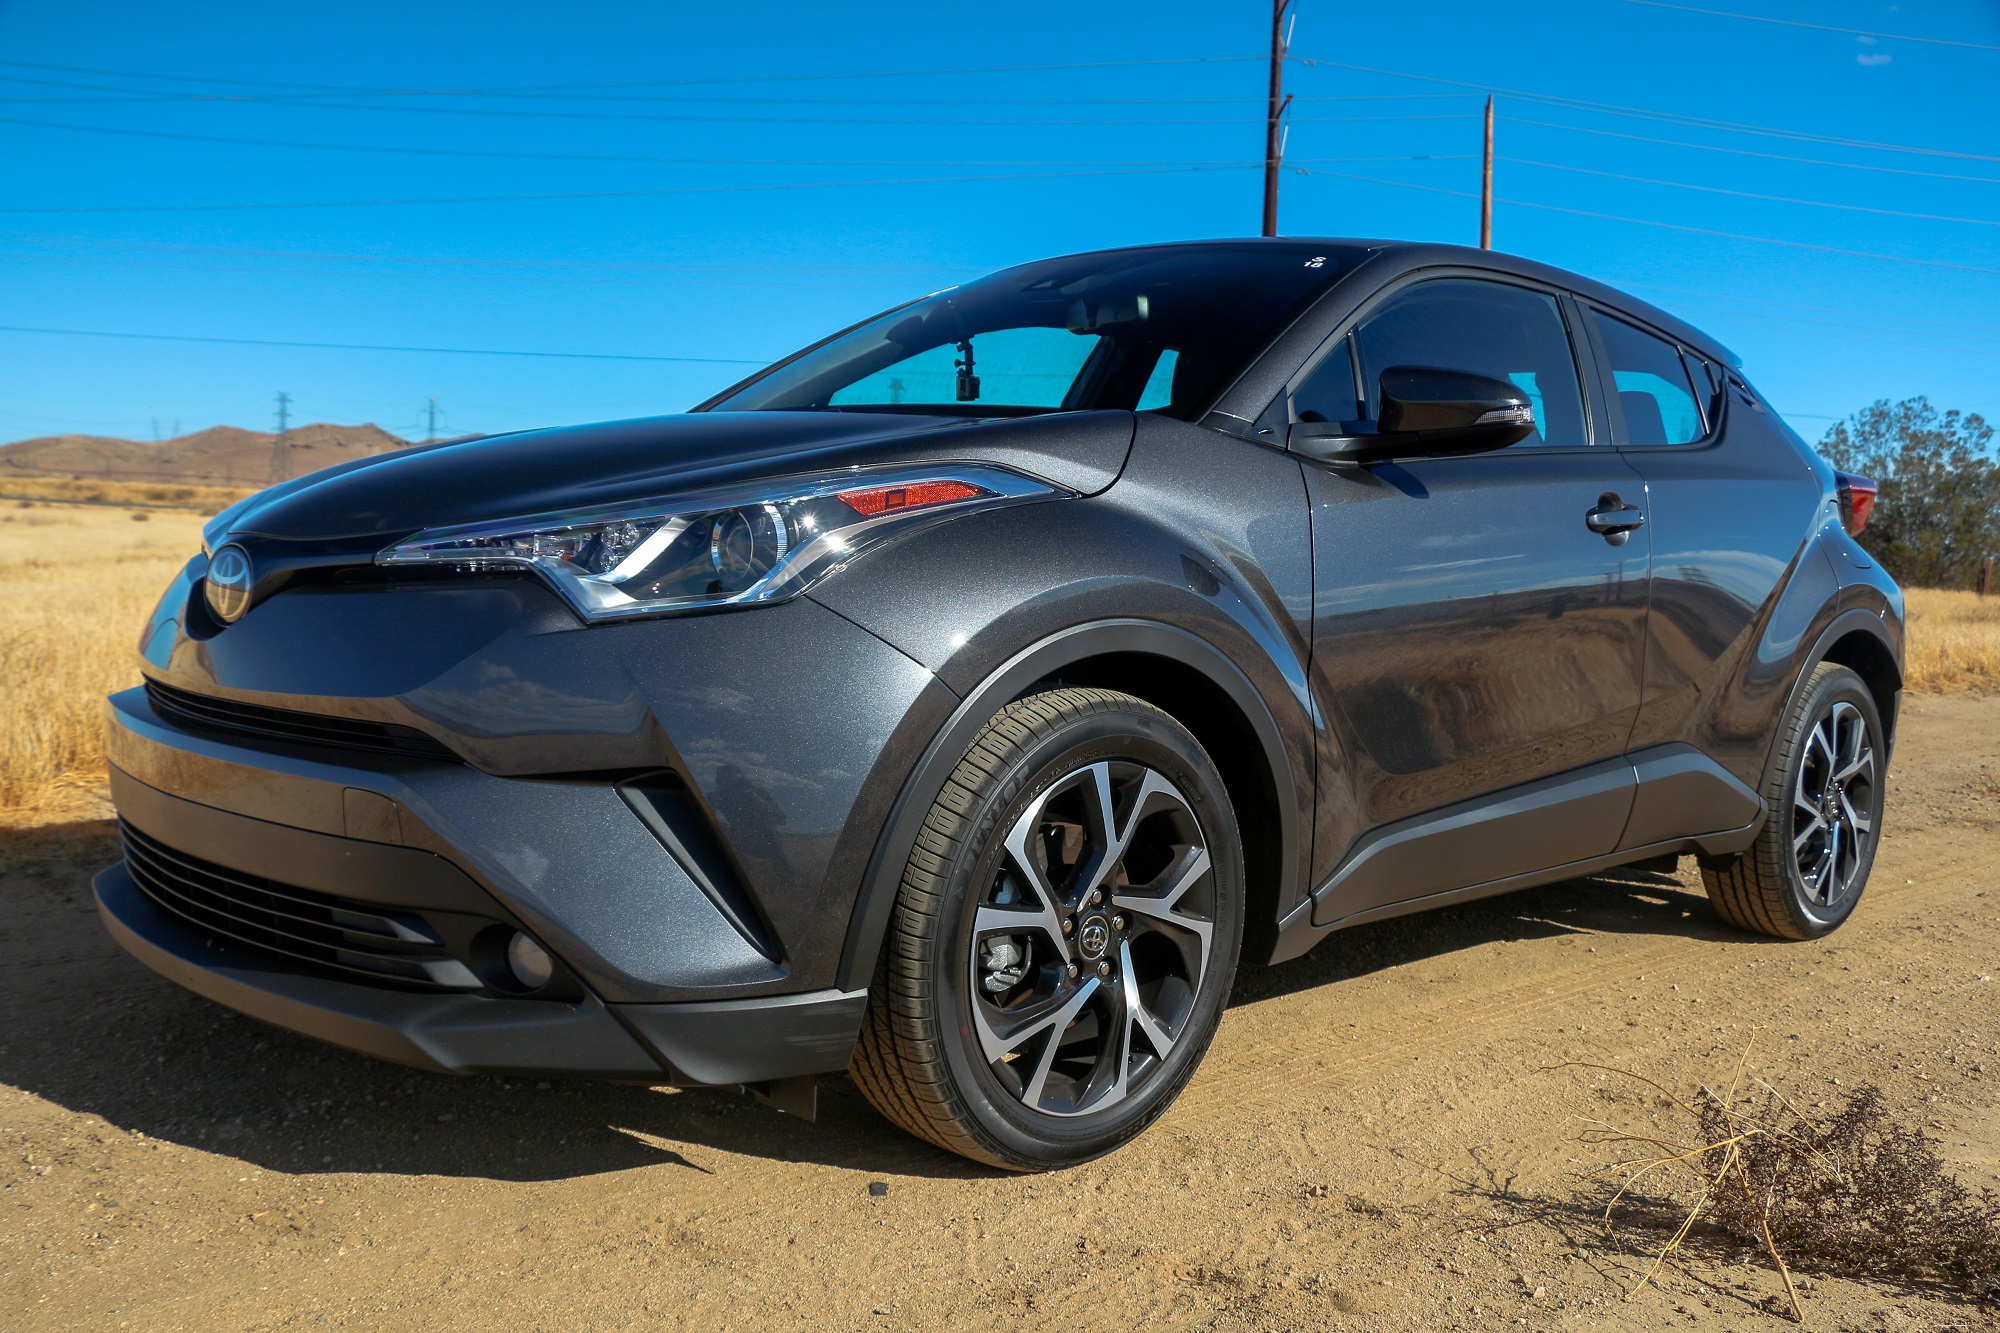 2018 2019 Toyota C-HR Compact SUV Tour Walkaround Review Buyers Guide ScionLife.com Jake Stumph